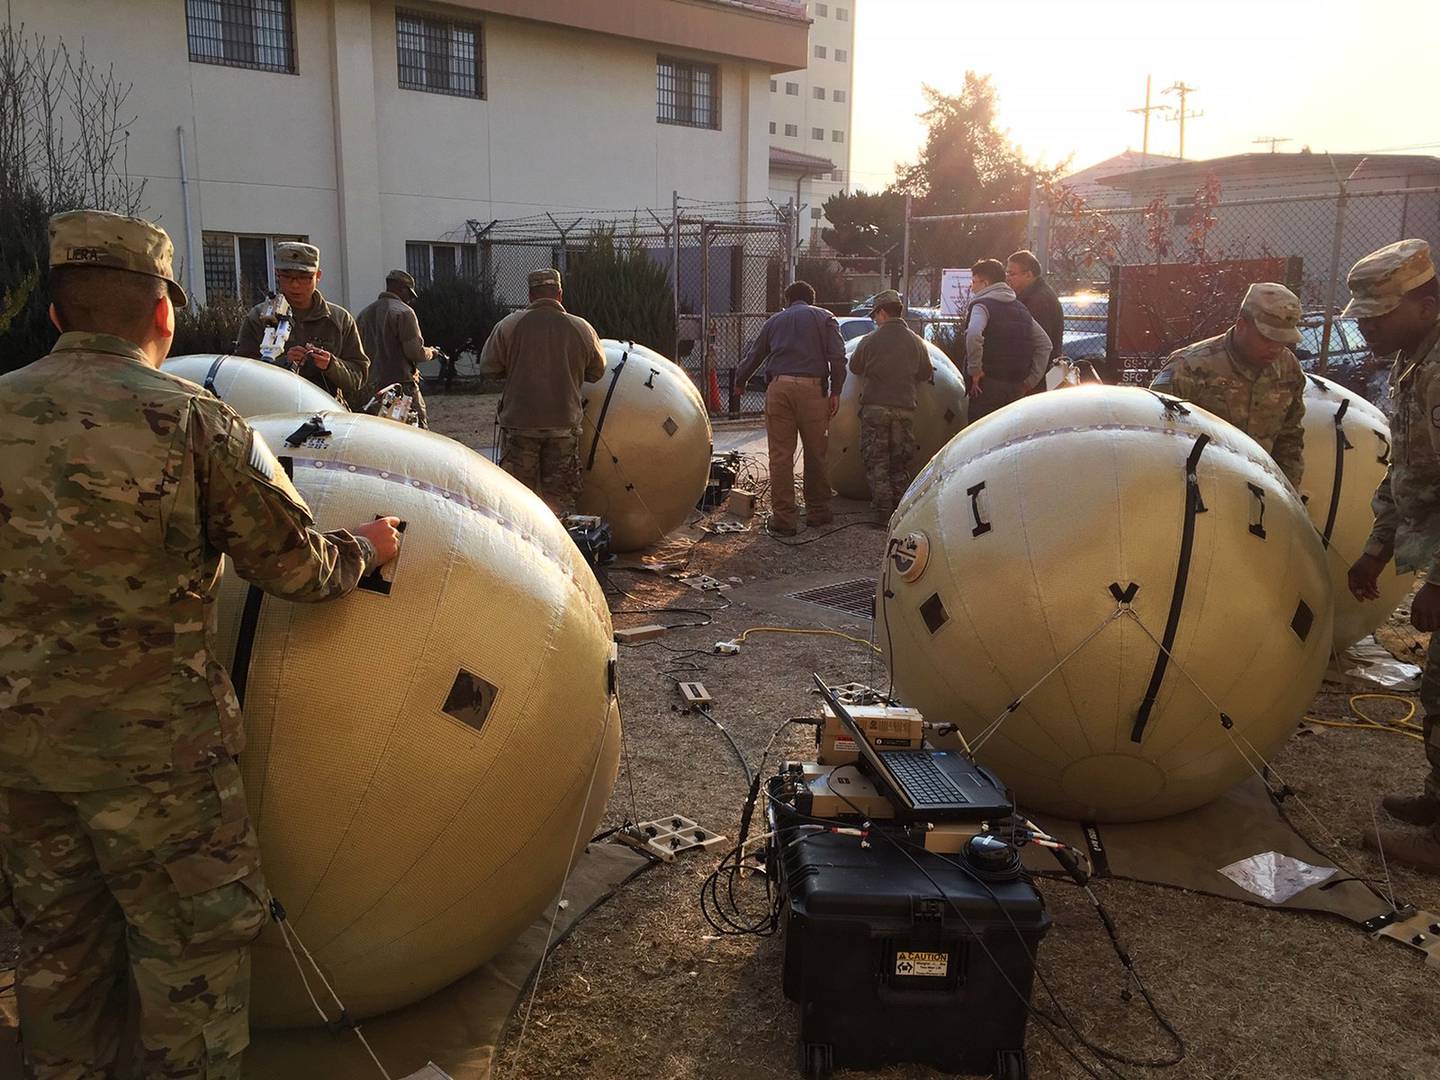 Fielded in conjunction with the U.S. Army Communications-Electronics Command, the Inflatable satellite antenna is easier to move and set up, and operates on commercial and military frequency bands, reducing signal-jamming threats.